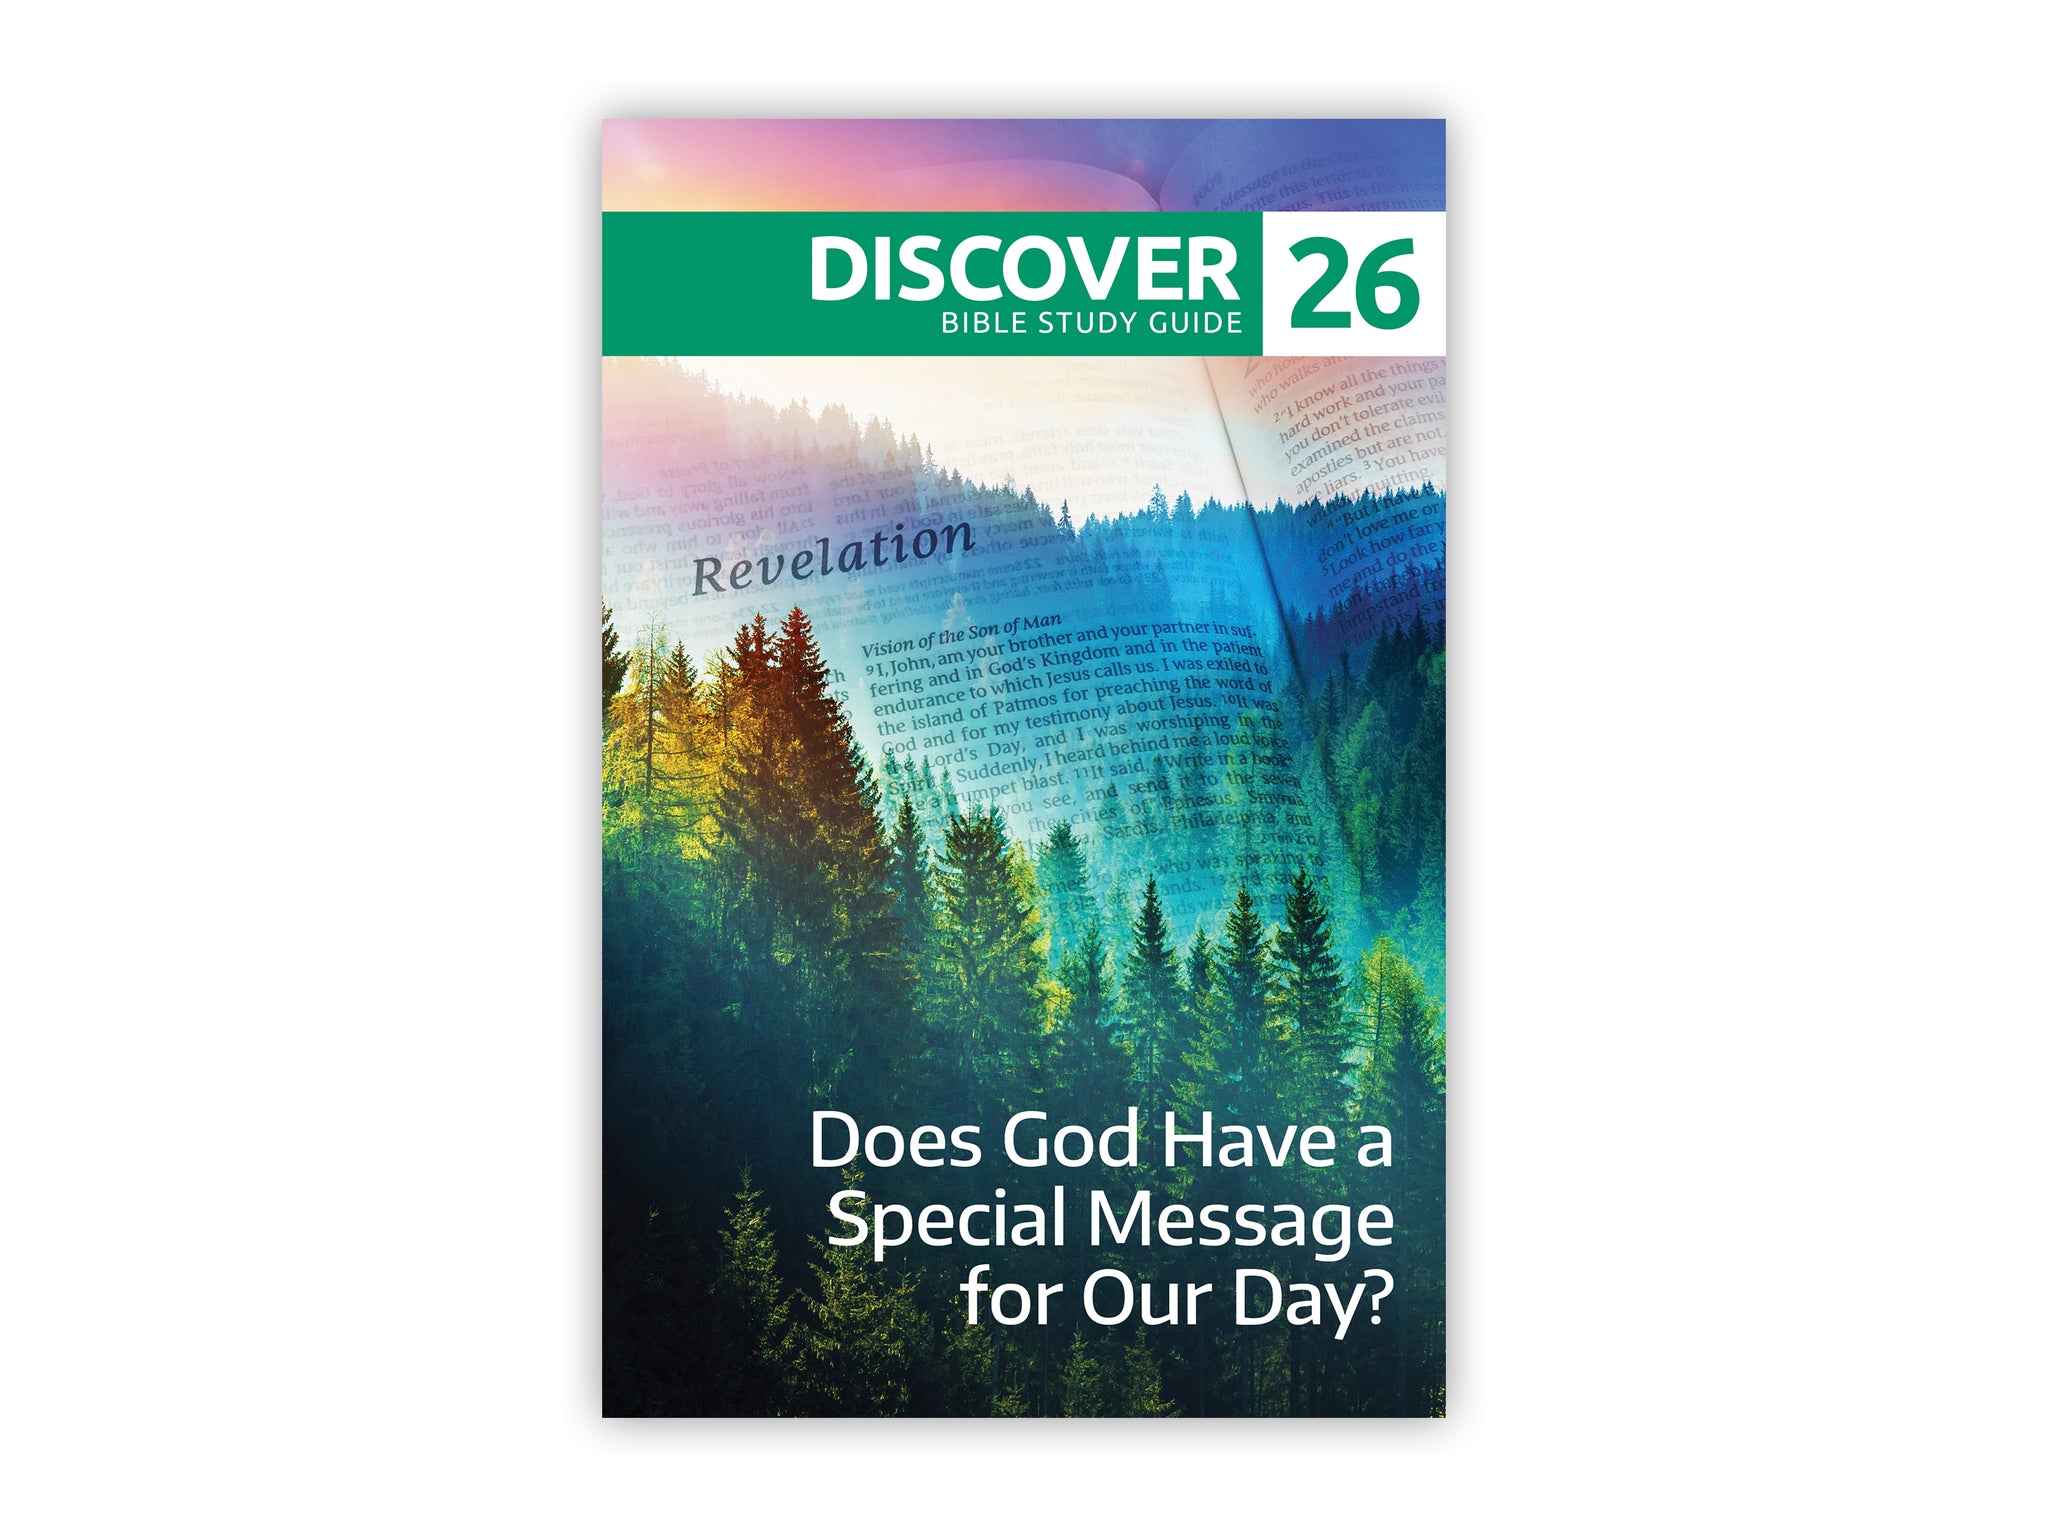 Discover Bible Study Guide #26 - Does God Have a Special Message for Our Day?